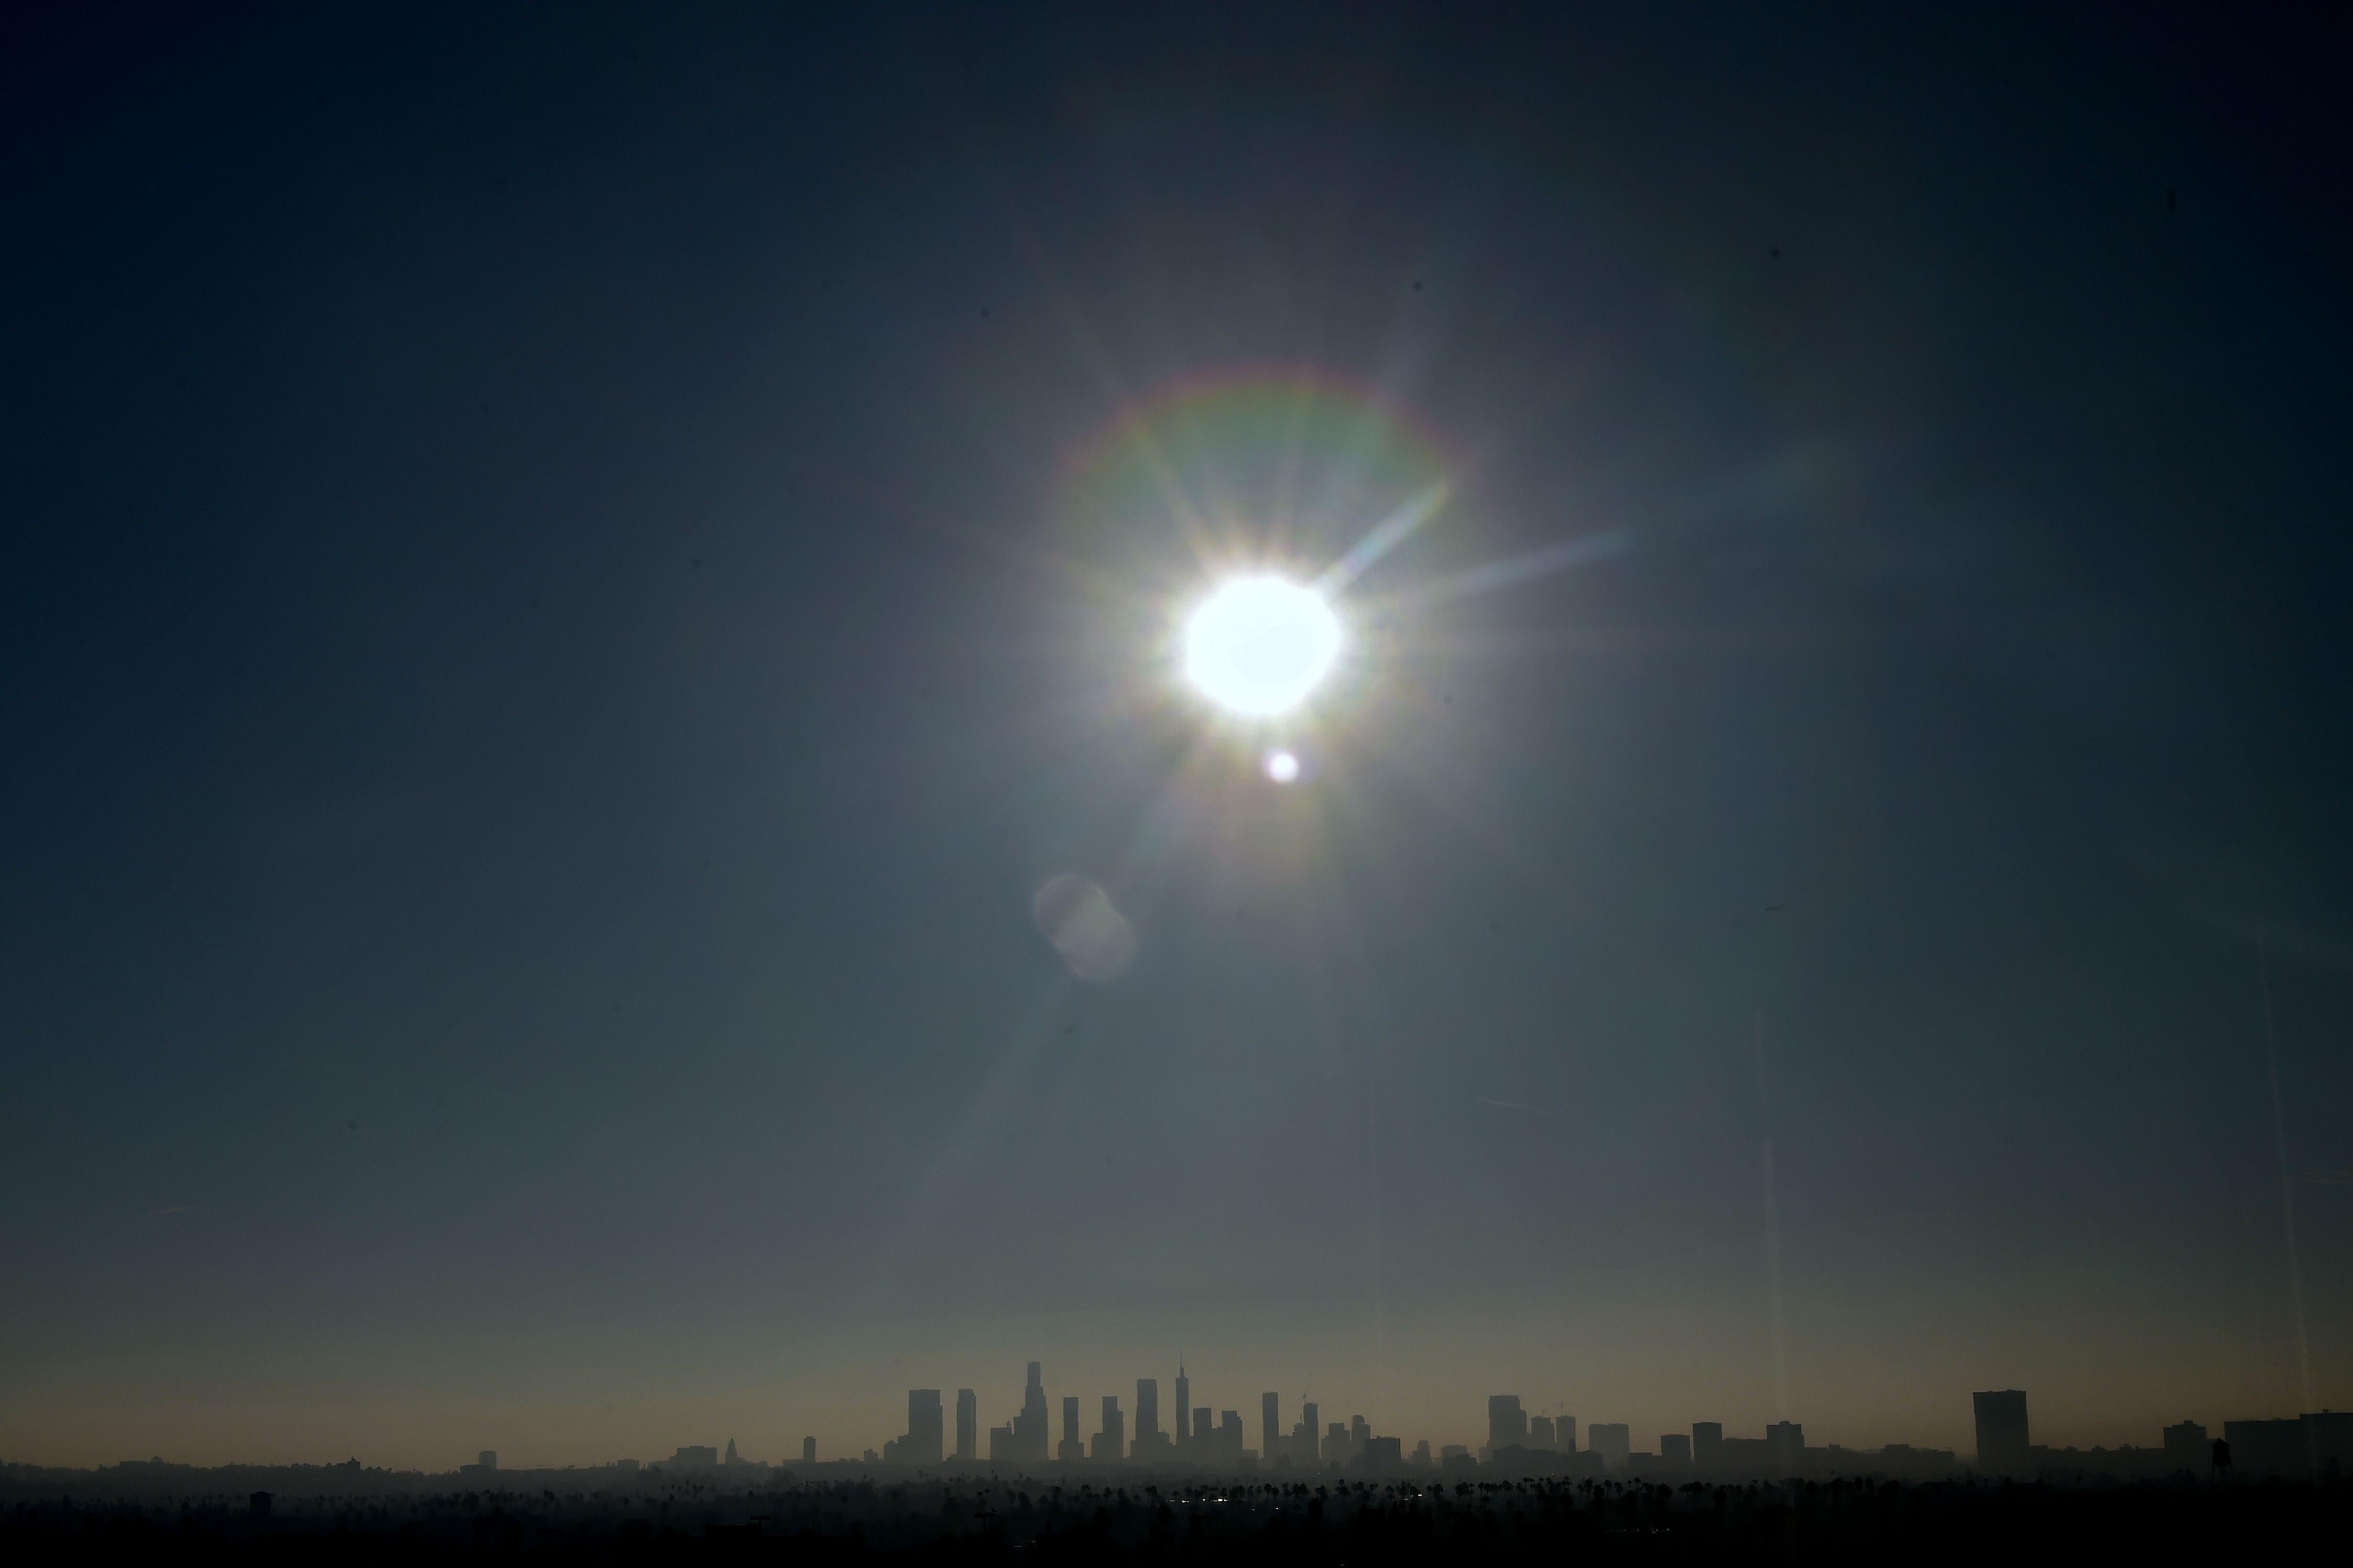 The sun shines over the Los Angeles skyline on January 5, 2018. 
A building boom not seen since the 1920's is underway with the construction of new concrete and glass towers. / AFP PHOTO / FREDERIC J. BROWN        (Photo credit should read FREDERIC J. BROWN/AFP/Getty Images)